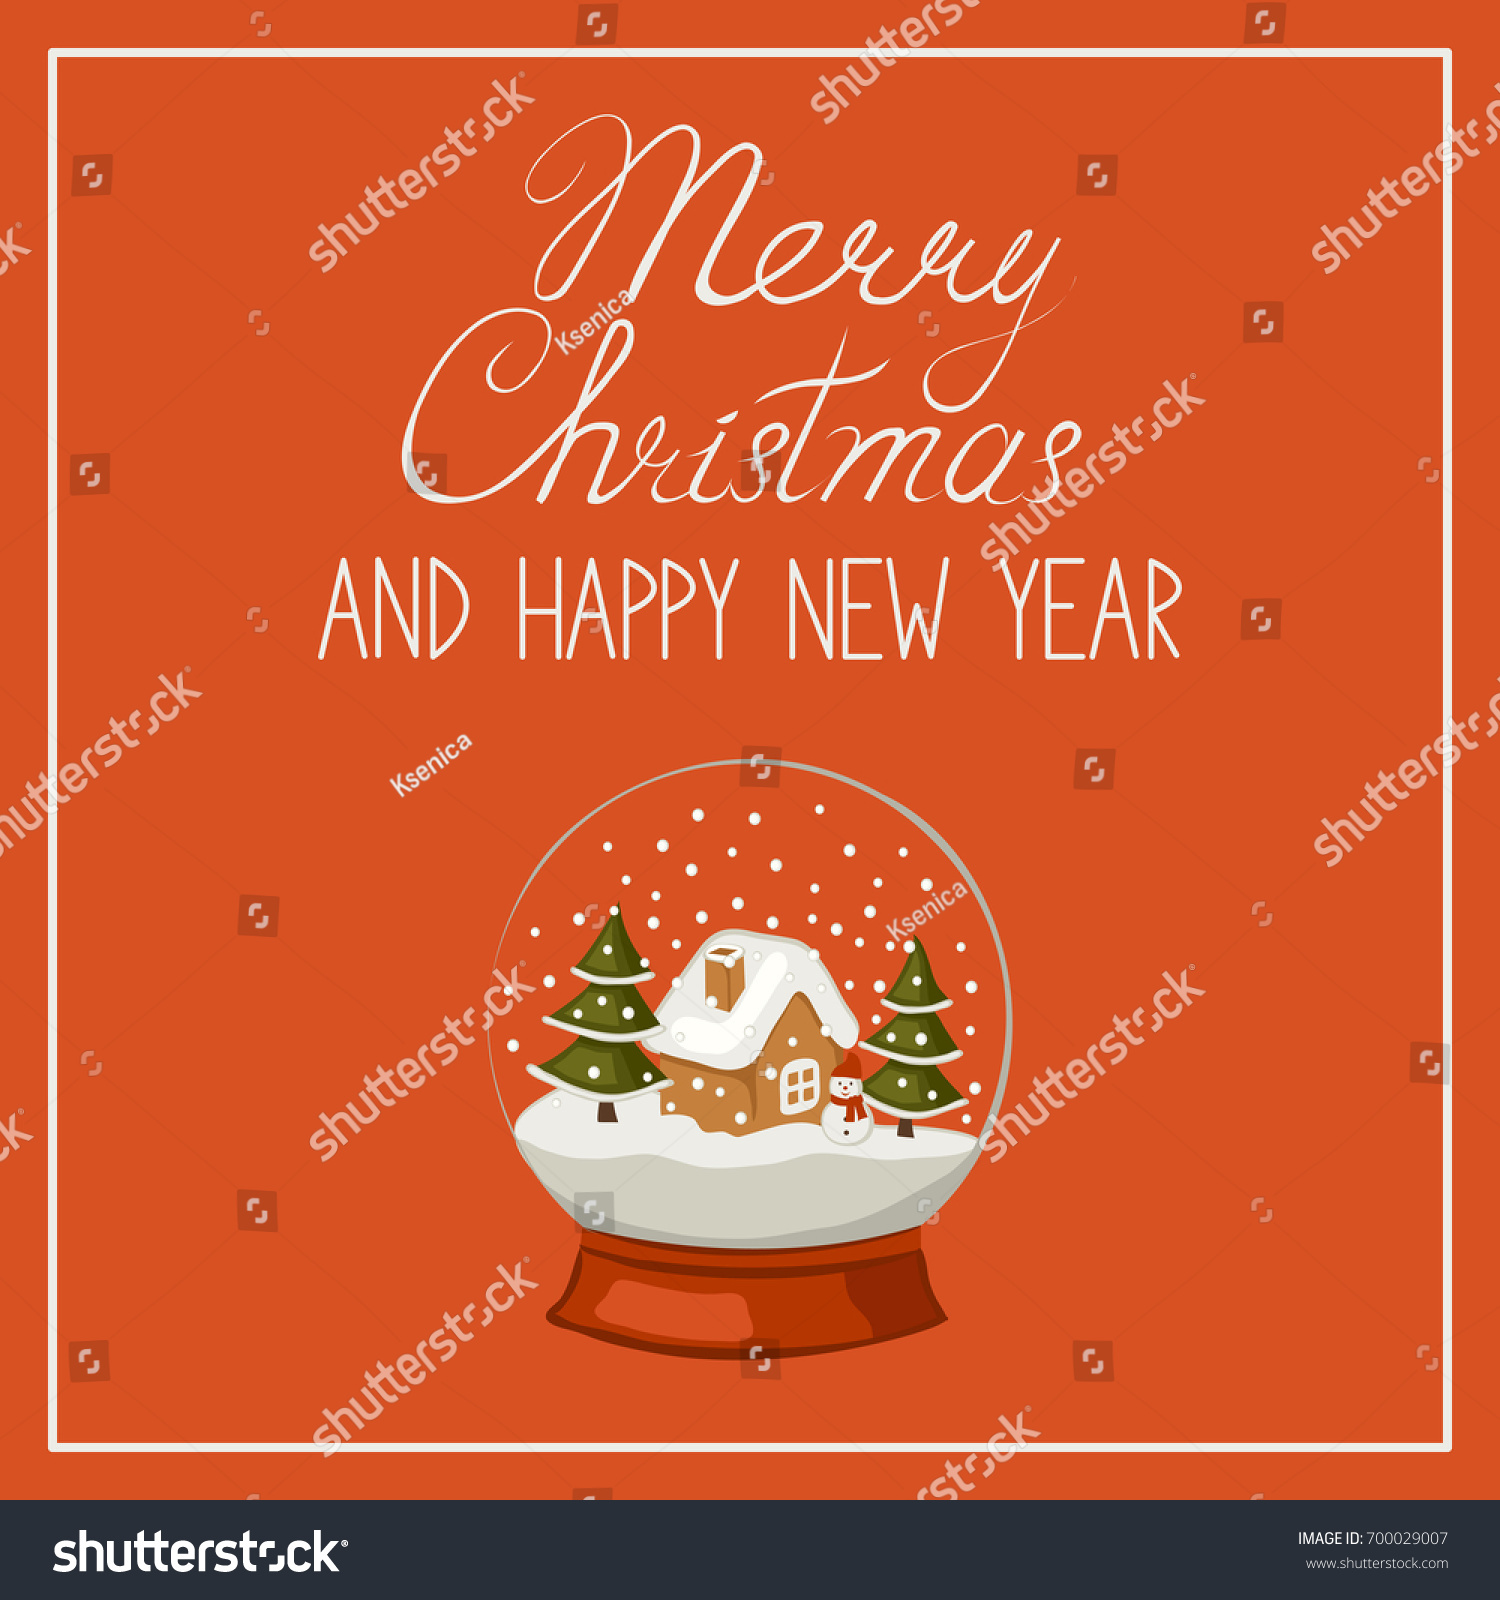 Merry Christmas and happy new year banner greeting card Calligraphic text and a snow globe